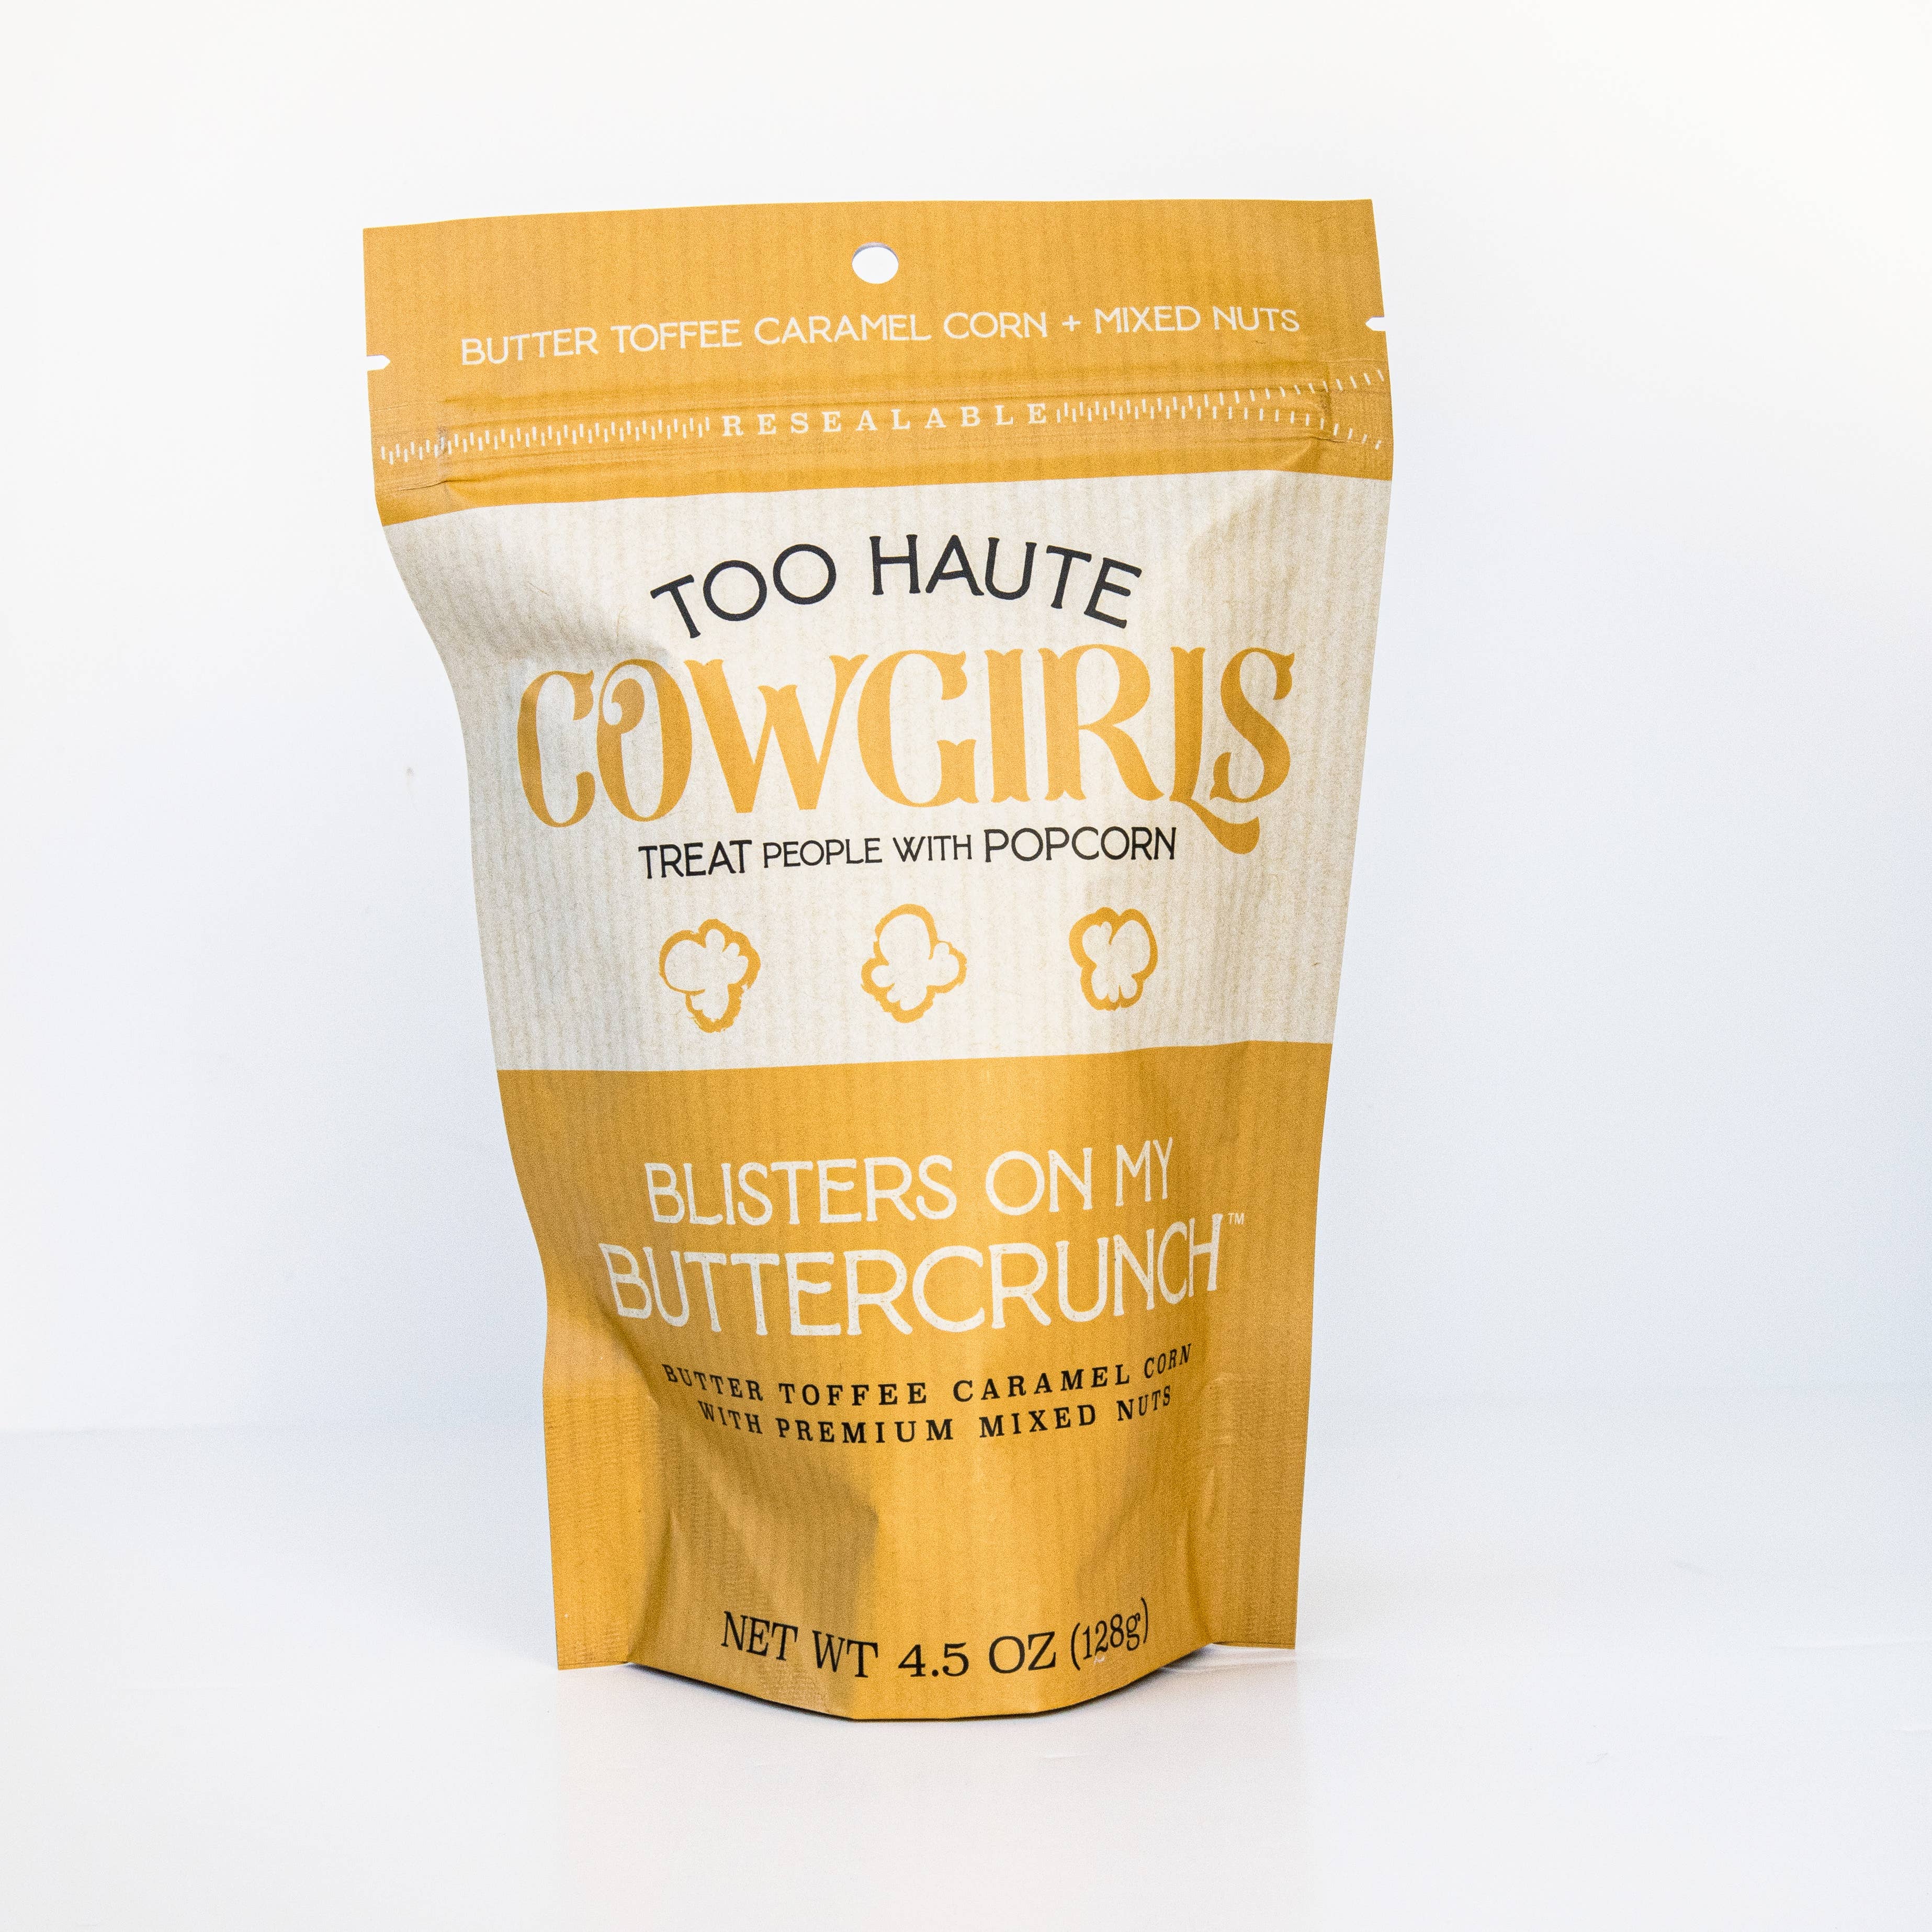 Too Haute Cowgirls Blisters on my Buttercrunch